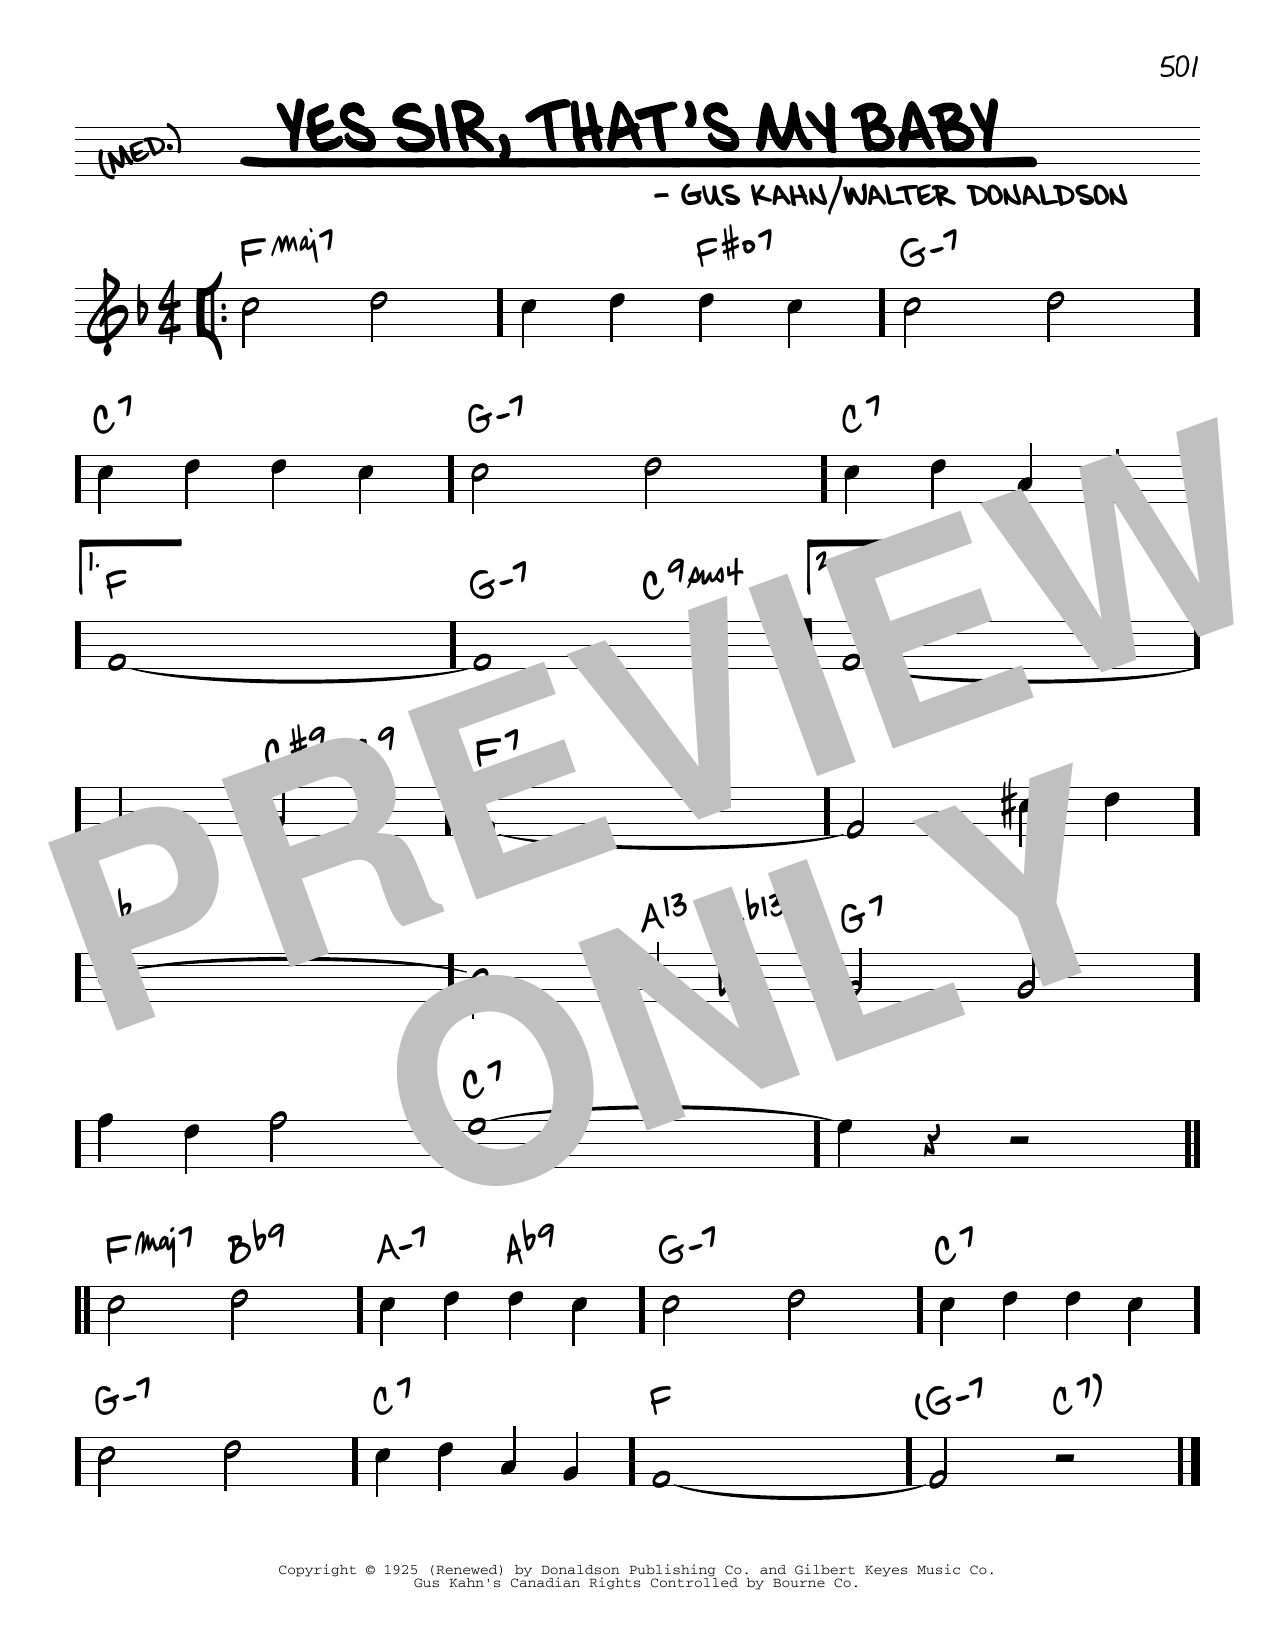 Download Walter Donaldson and Gus Kahn Yes Sir, That's My Baby Sheet Music